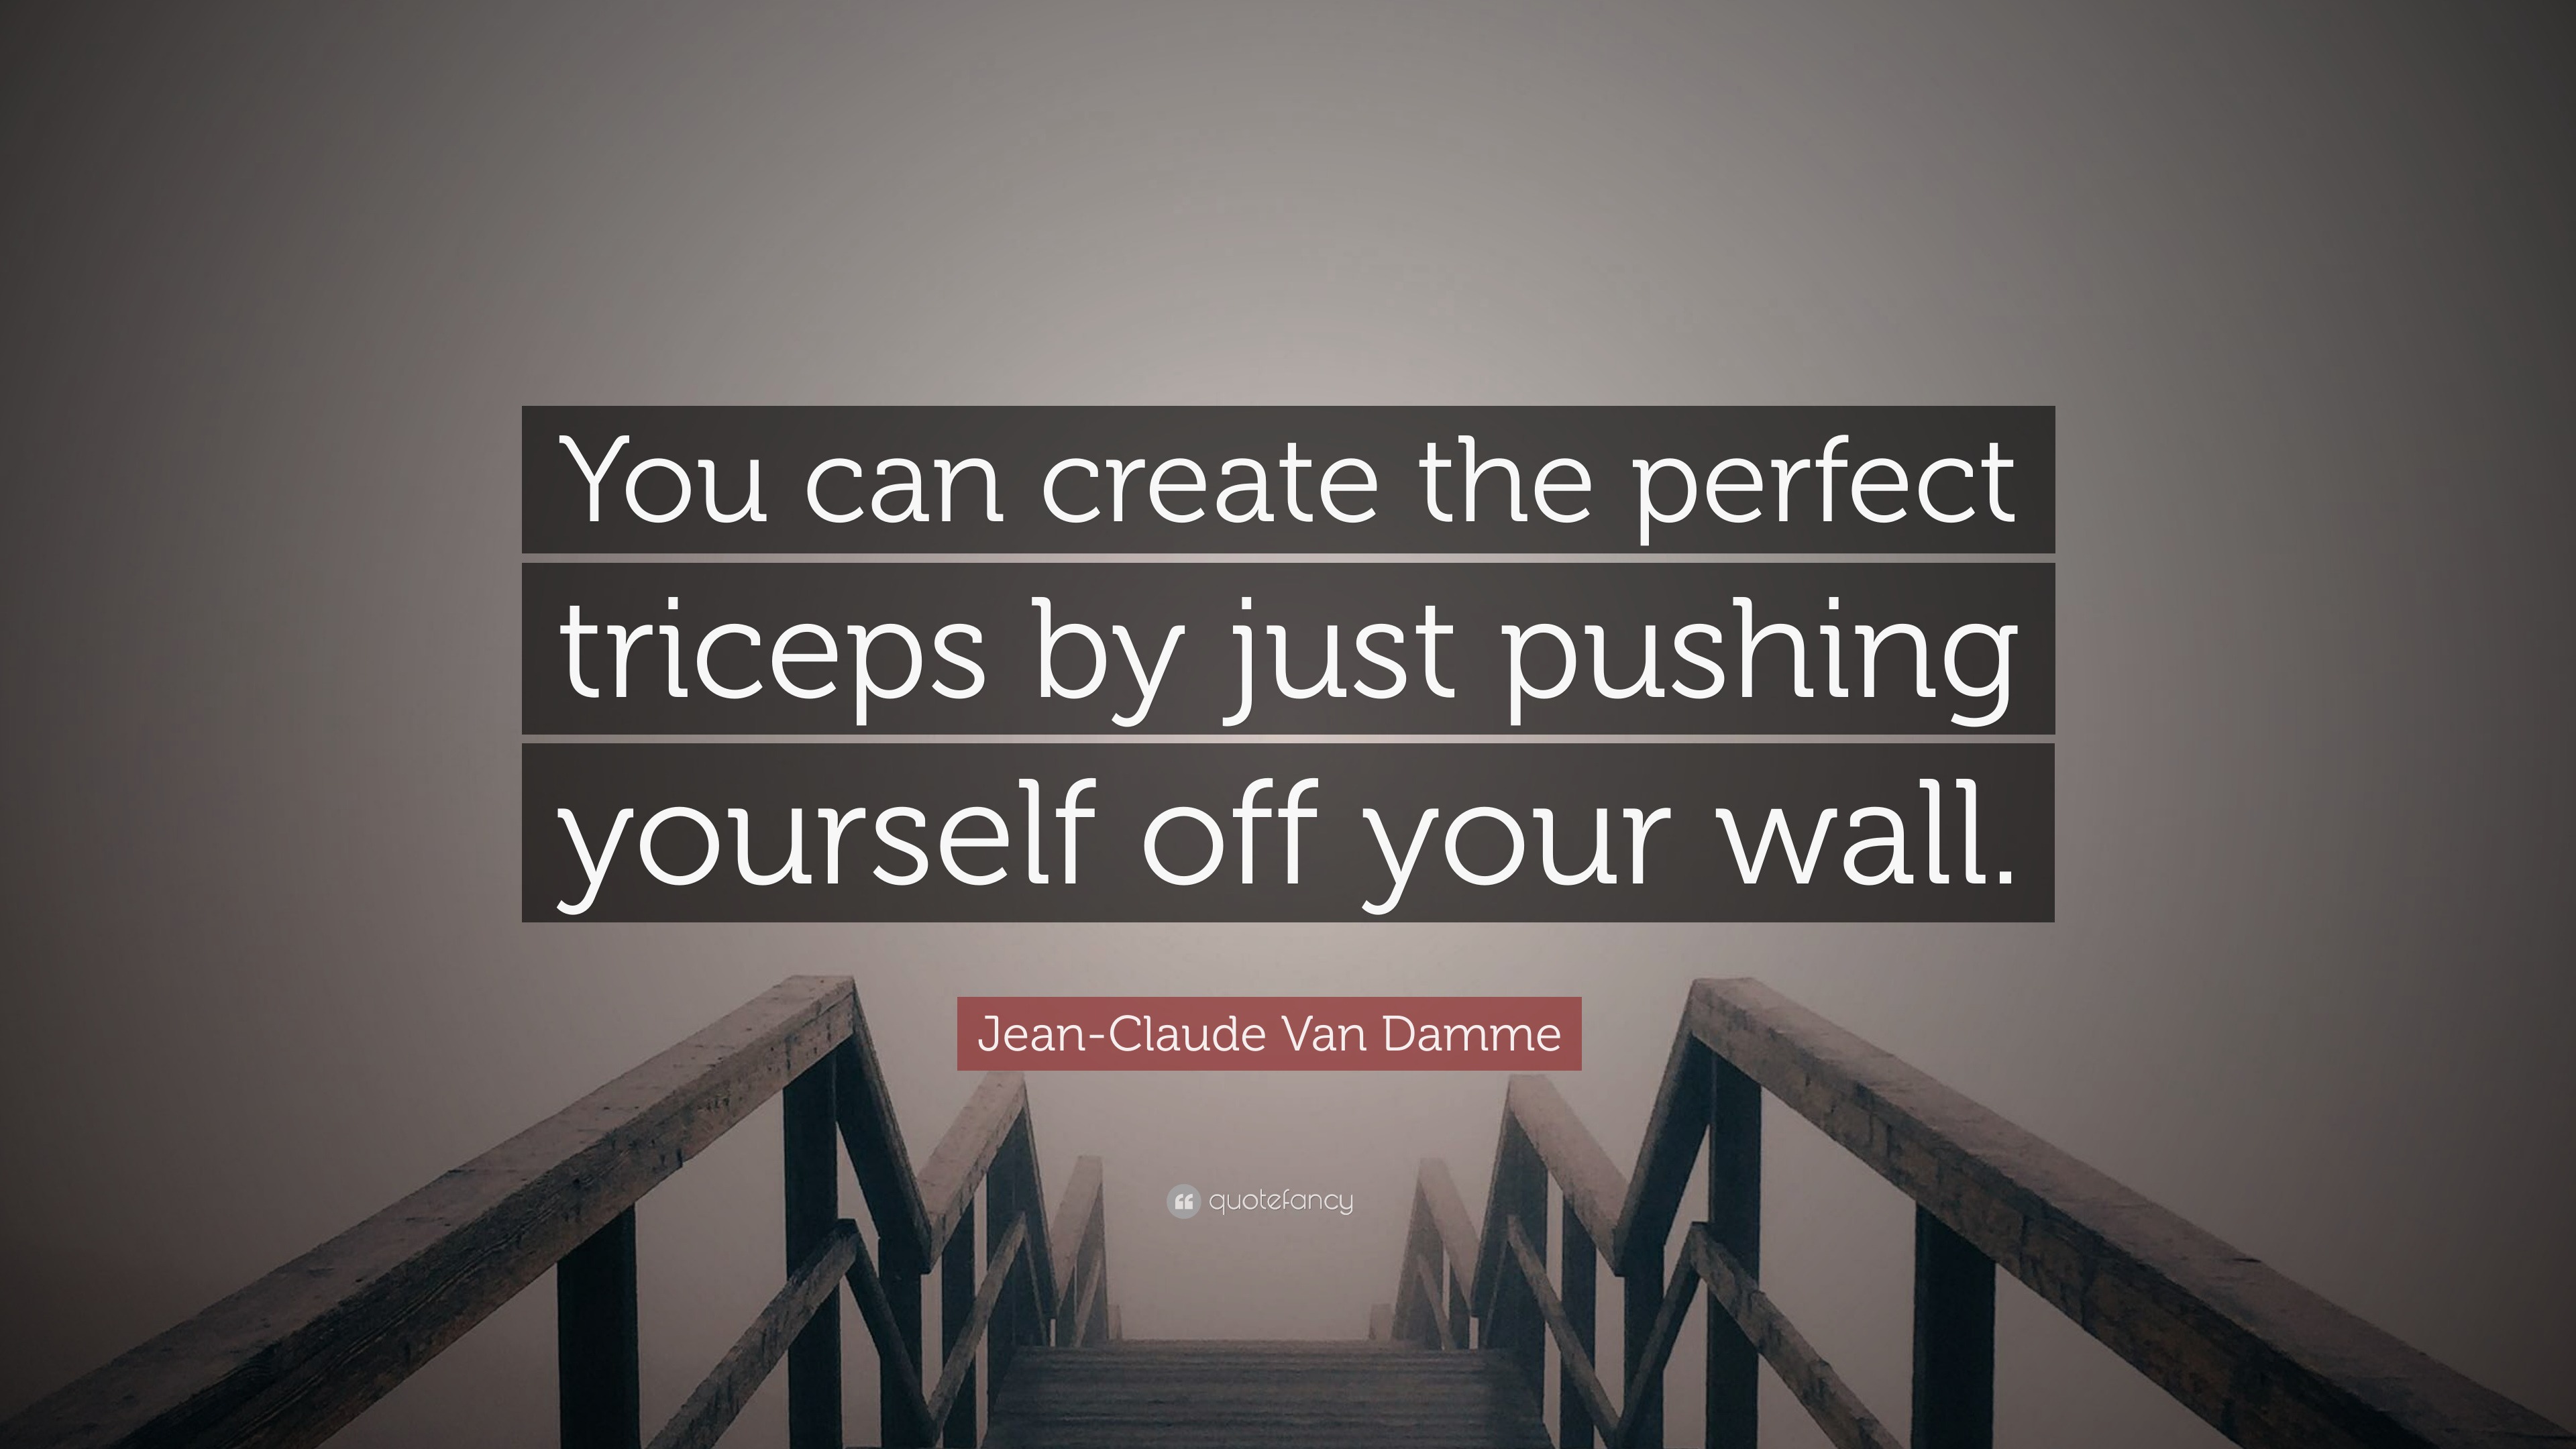 Jean-Claude Van Damme Quote: “You can create the perfect triceps by just  pushing yourself off